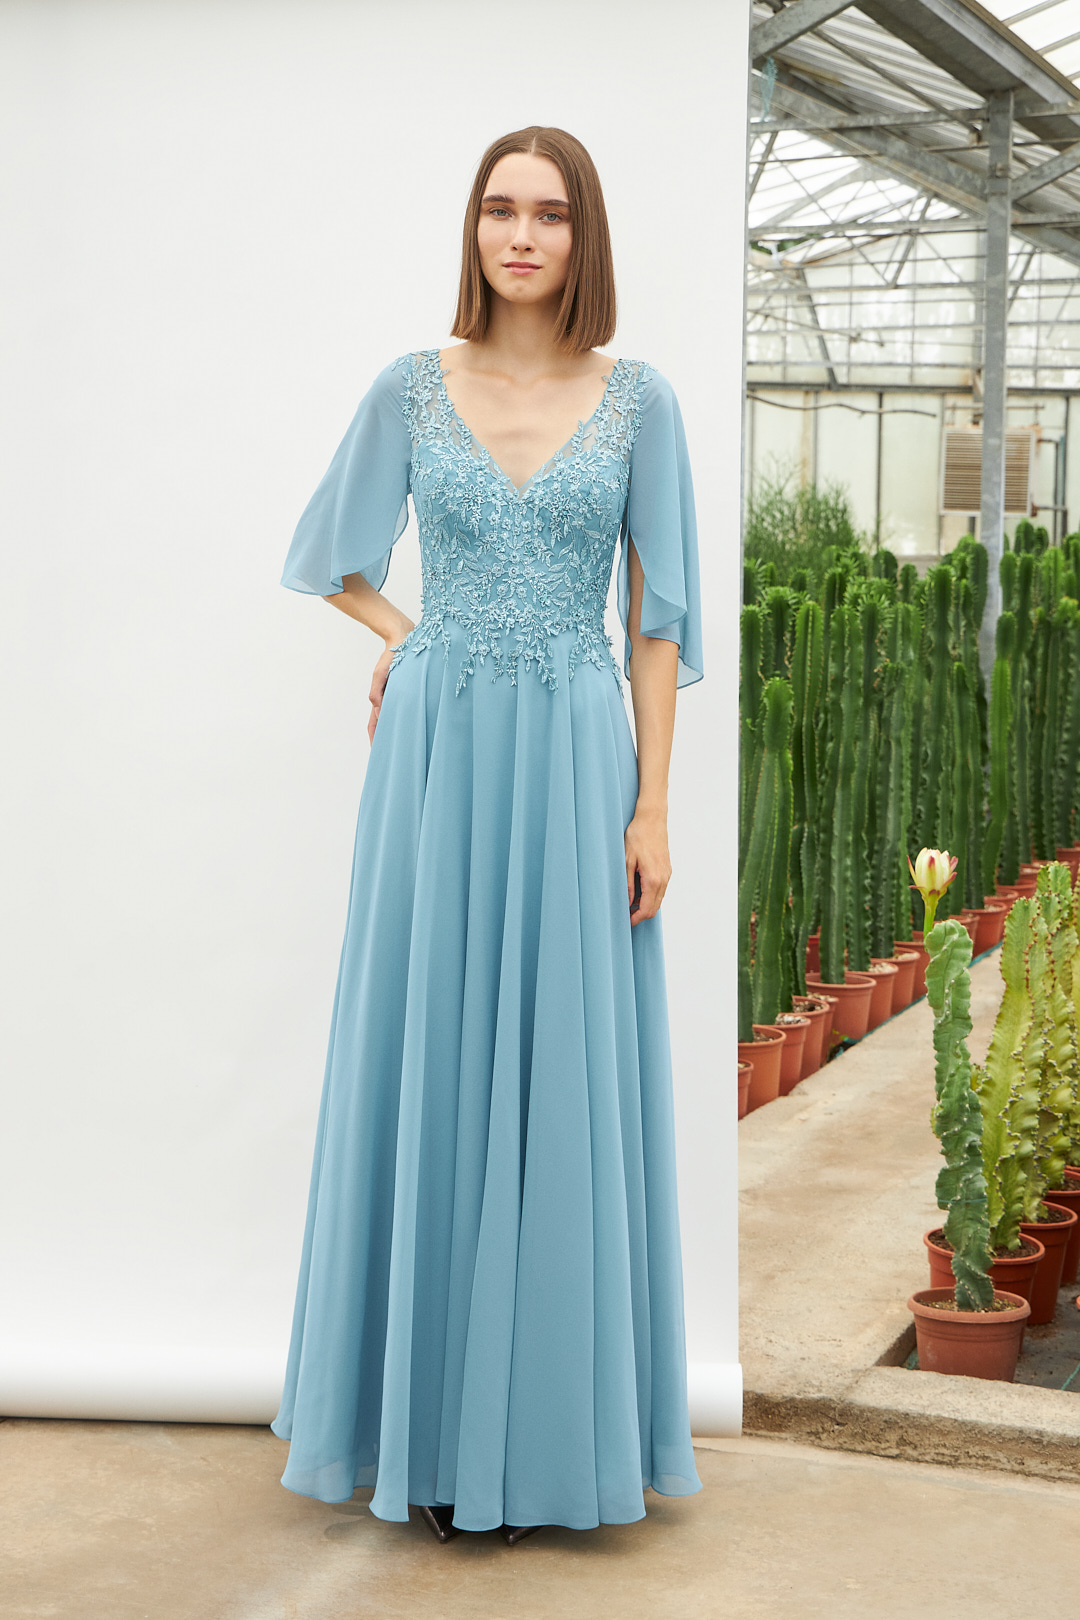 Classic Dresses / Long classic chiffon dress with fully beaded top and sleeves with chiffon